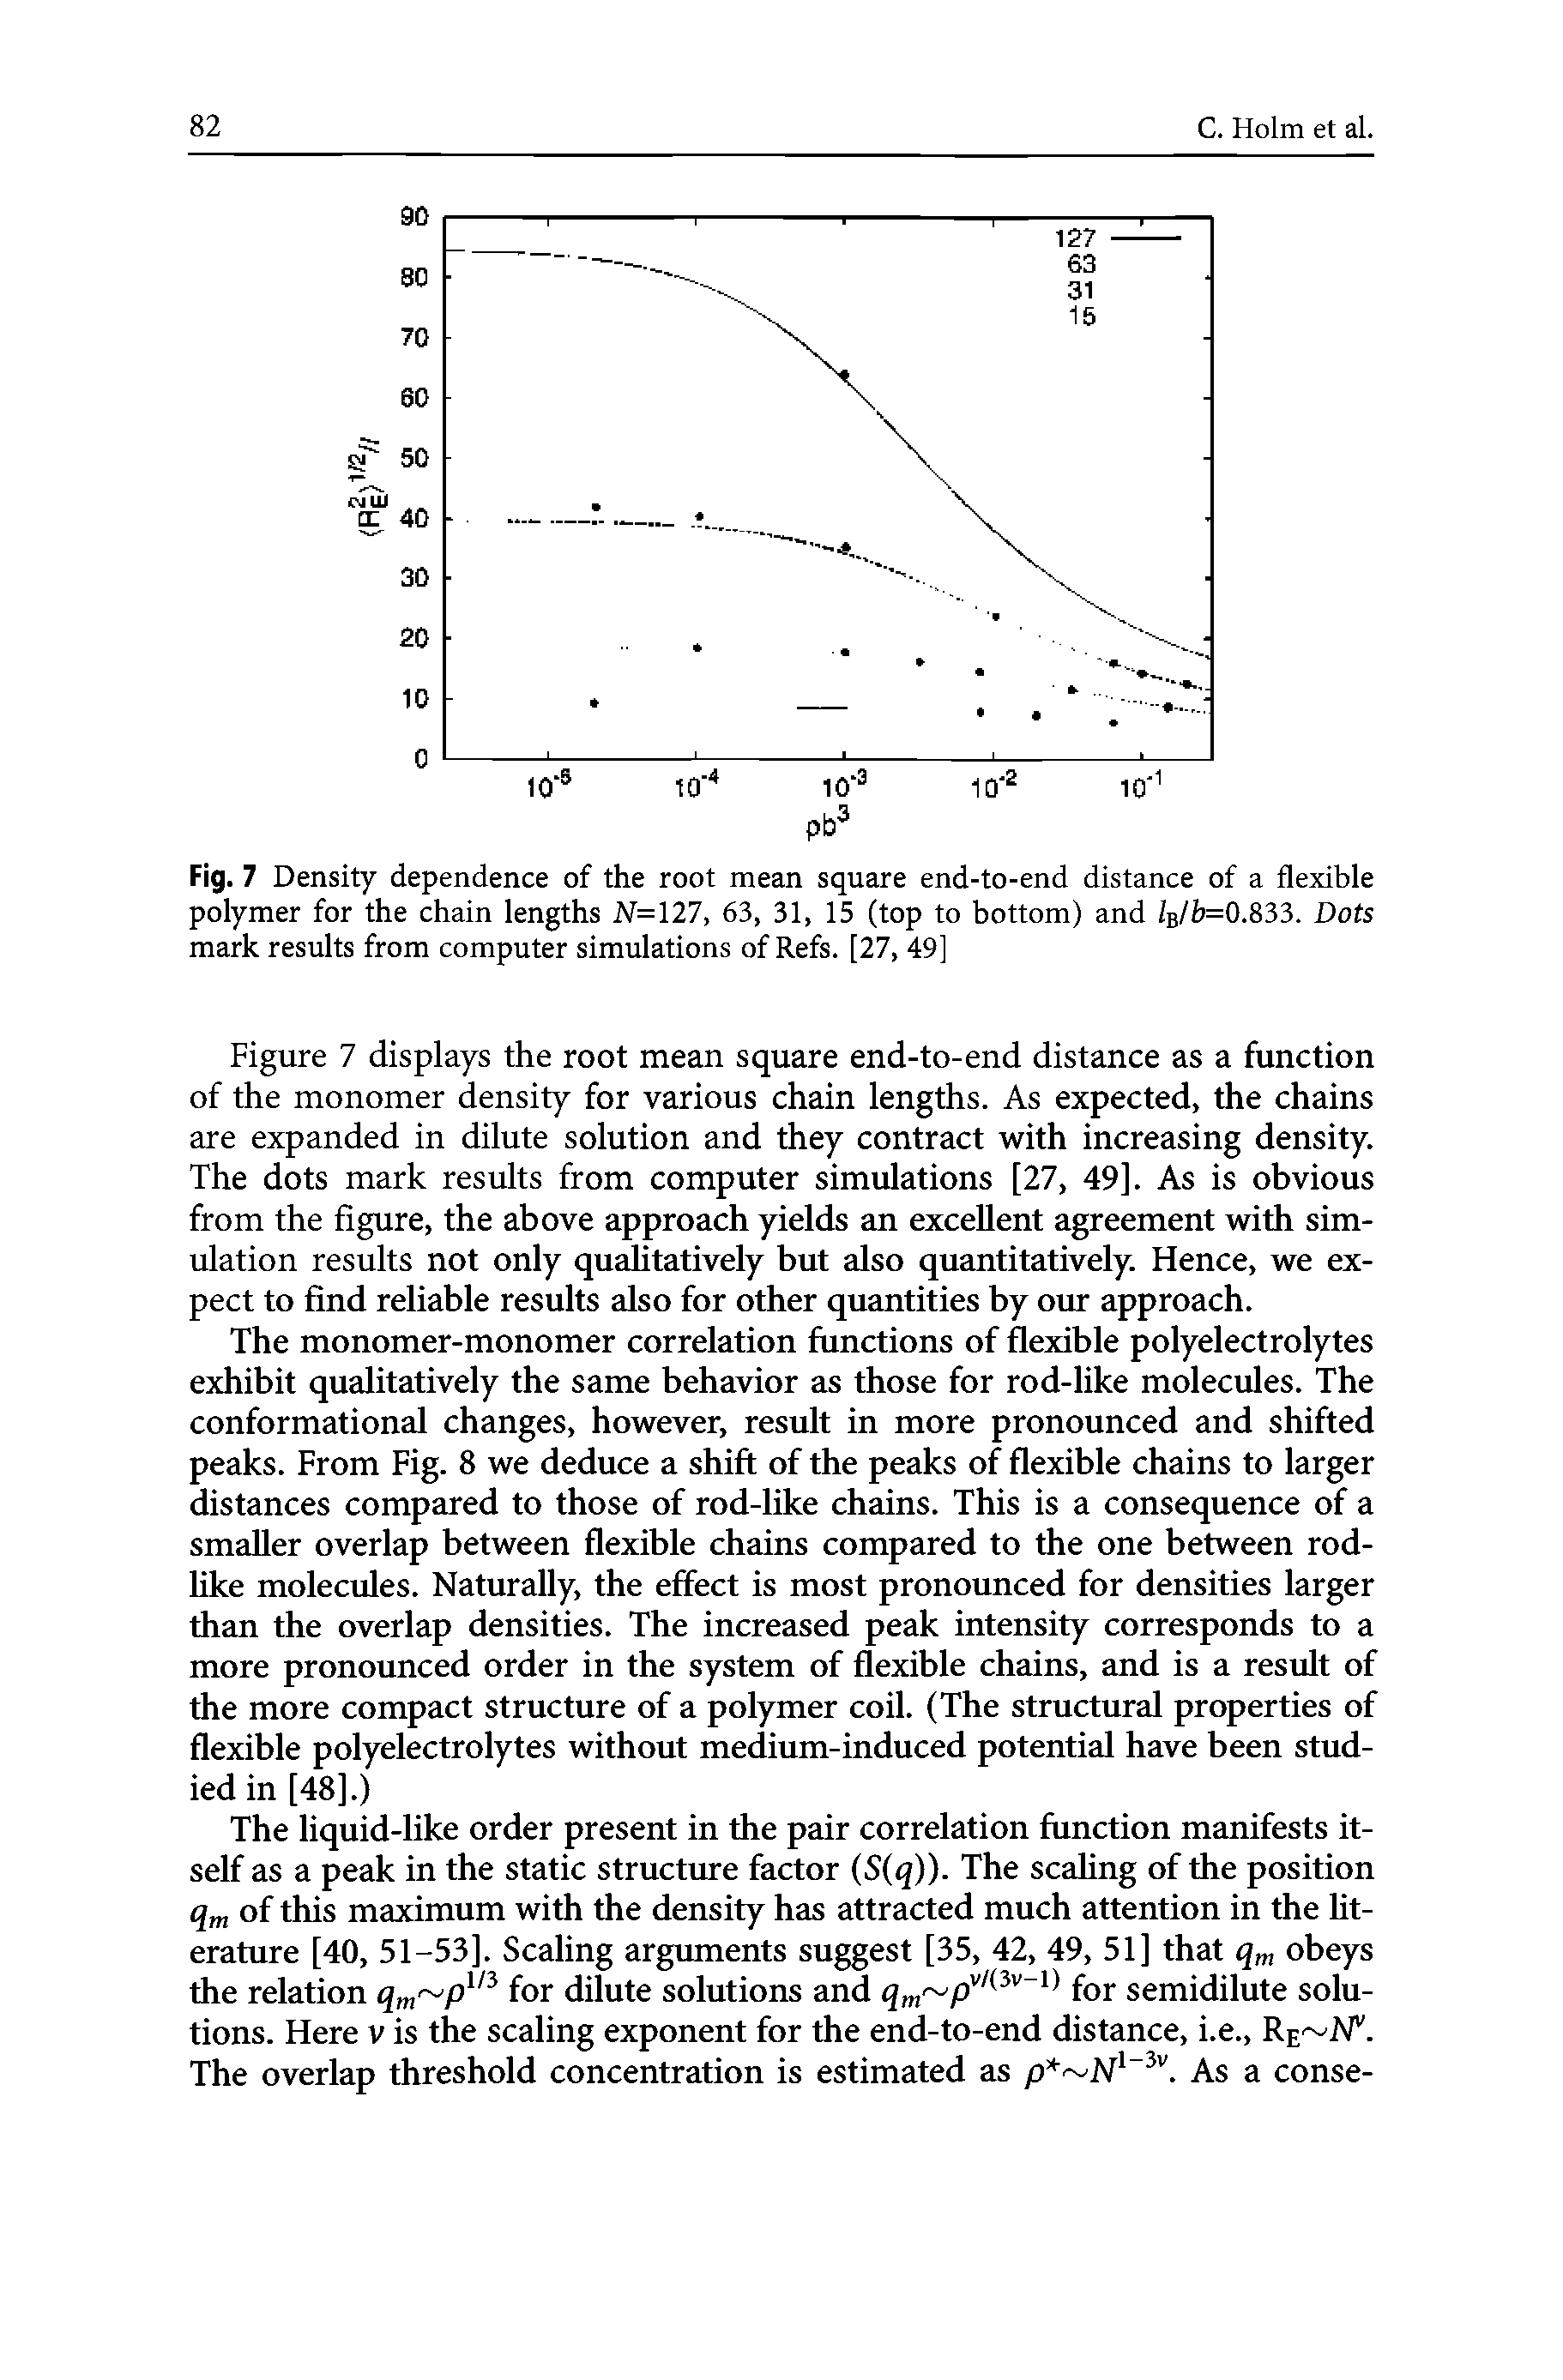 Fig. 7 Density dependence of the root mean square end-to-end distance of a flexible polymer for the chain lengths N= 127, 63, 31, 15 (top to bottom) and hlb=0.833. Dots mark results from computer simulations of Refs. [27, 49]...